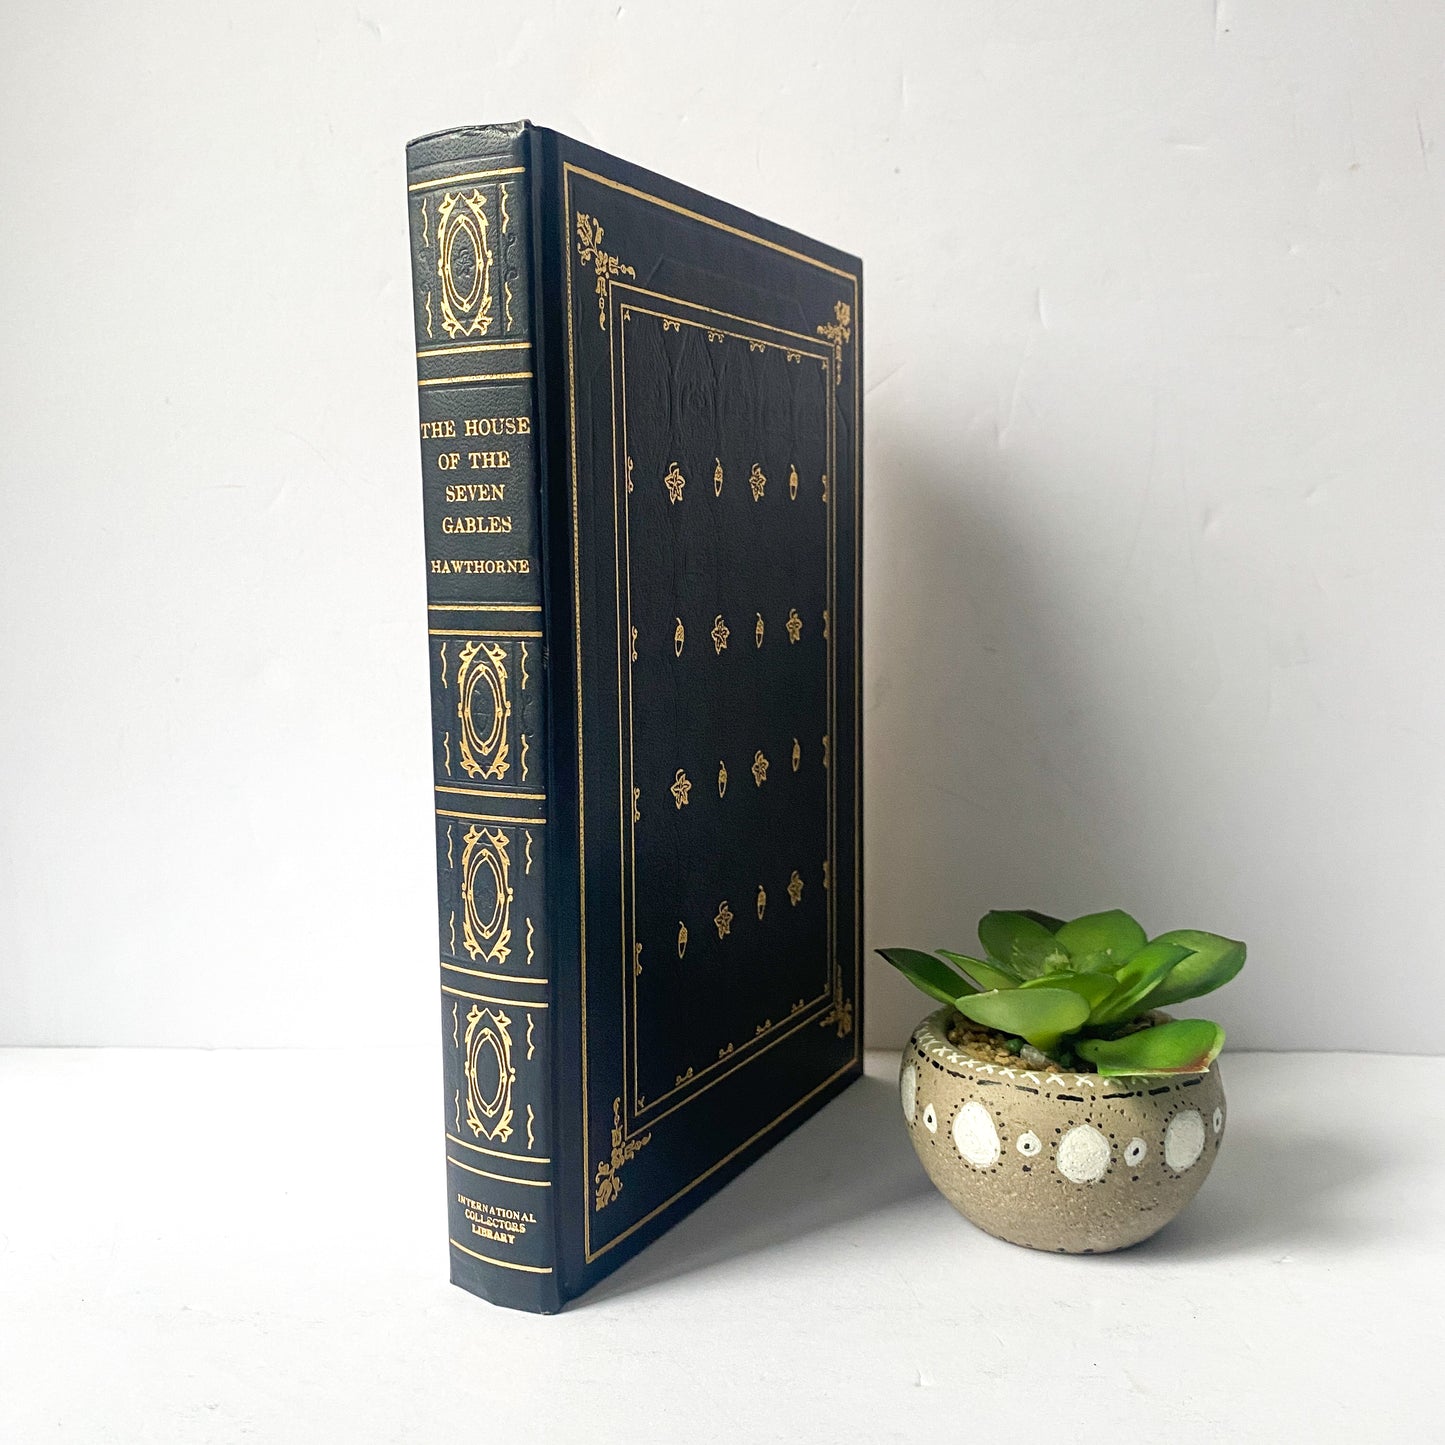 The House of the Seven Gables by Nathaniel Hawthorne, Vintage International Collectors Library Edition